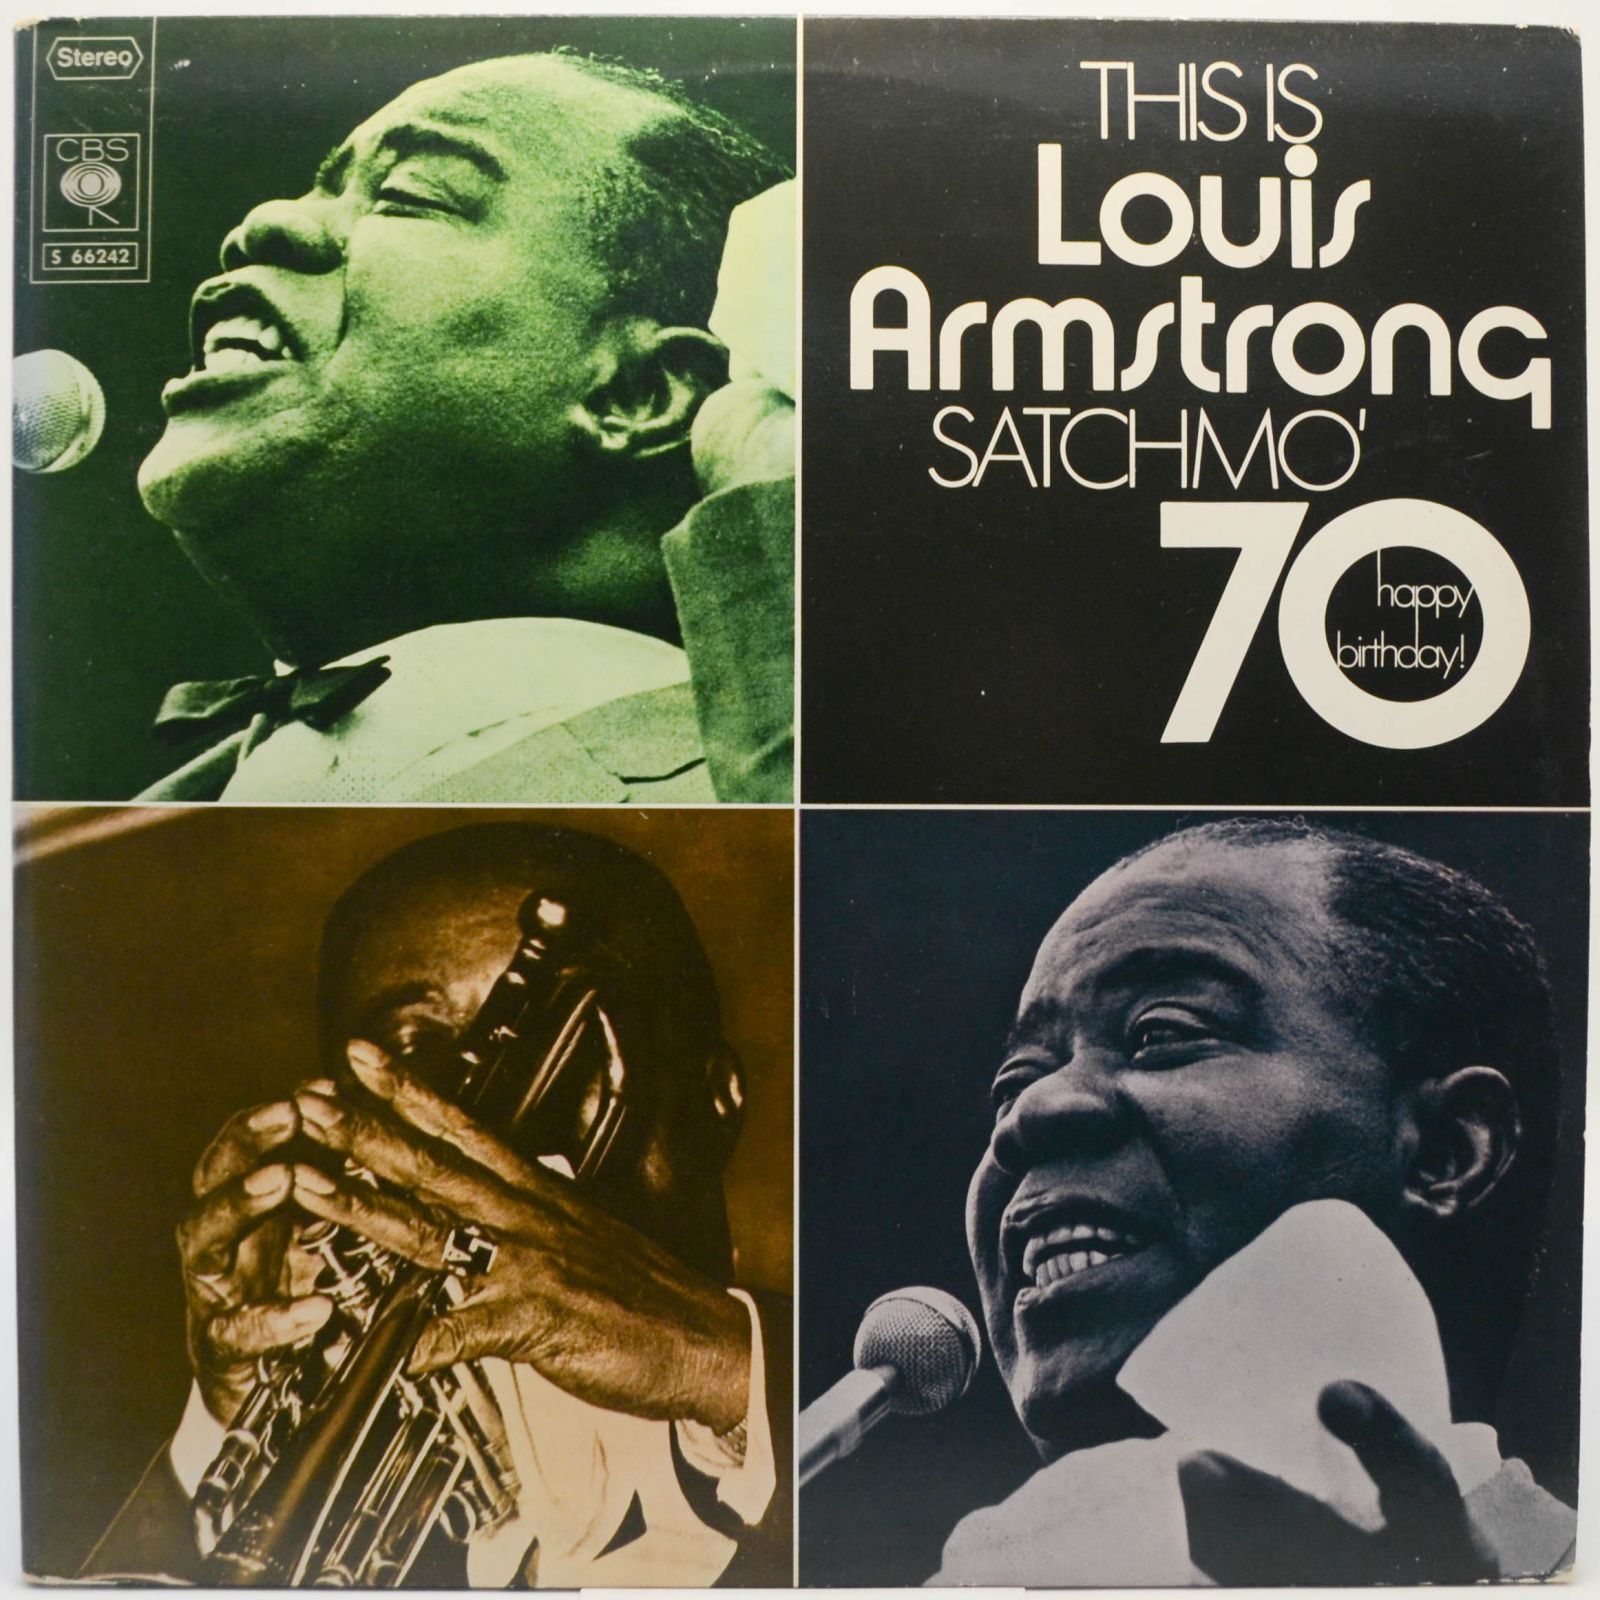 This Is Louis Armstrong - Satchmo '70 (2LP), 1973